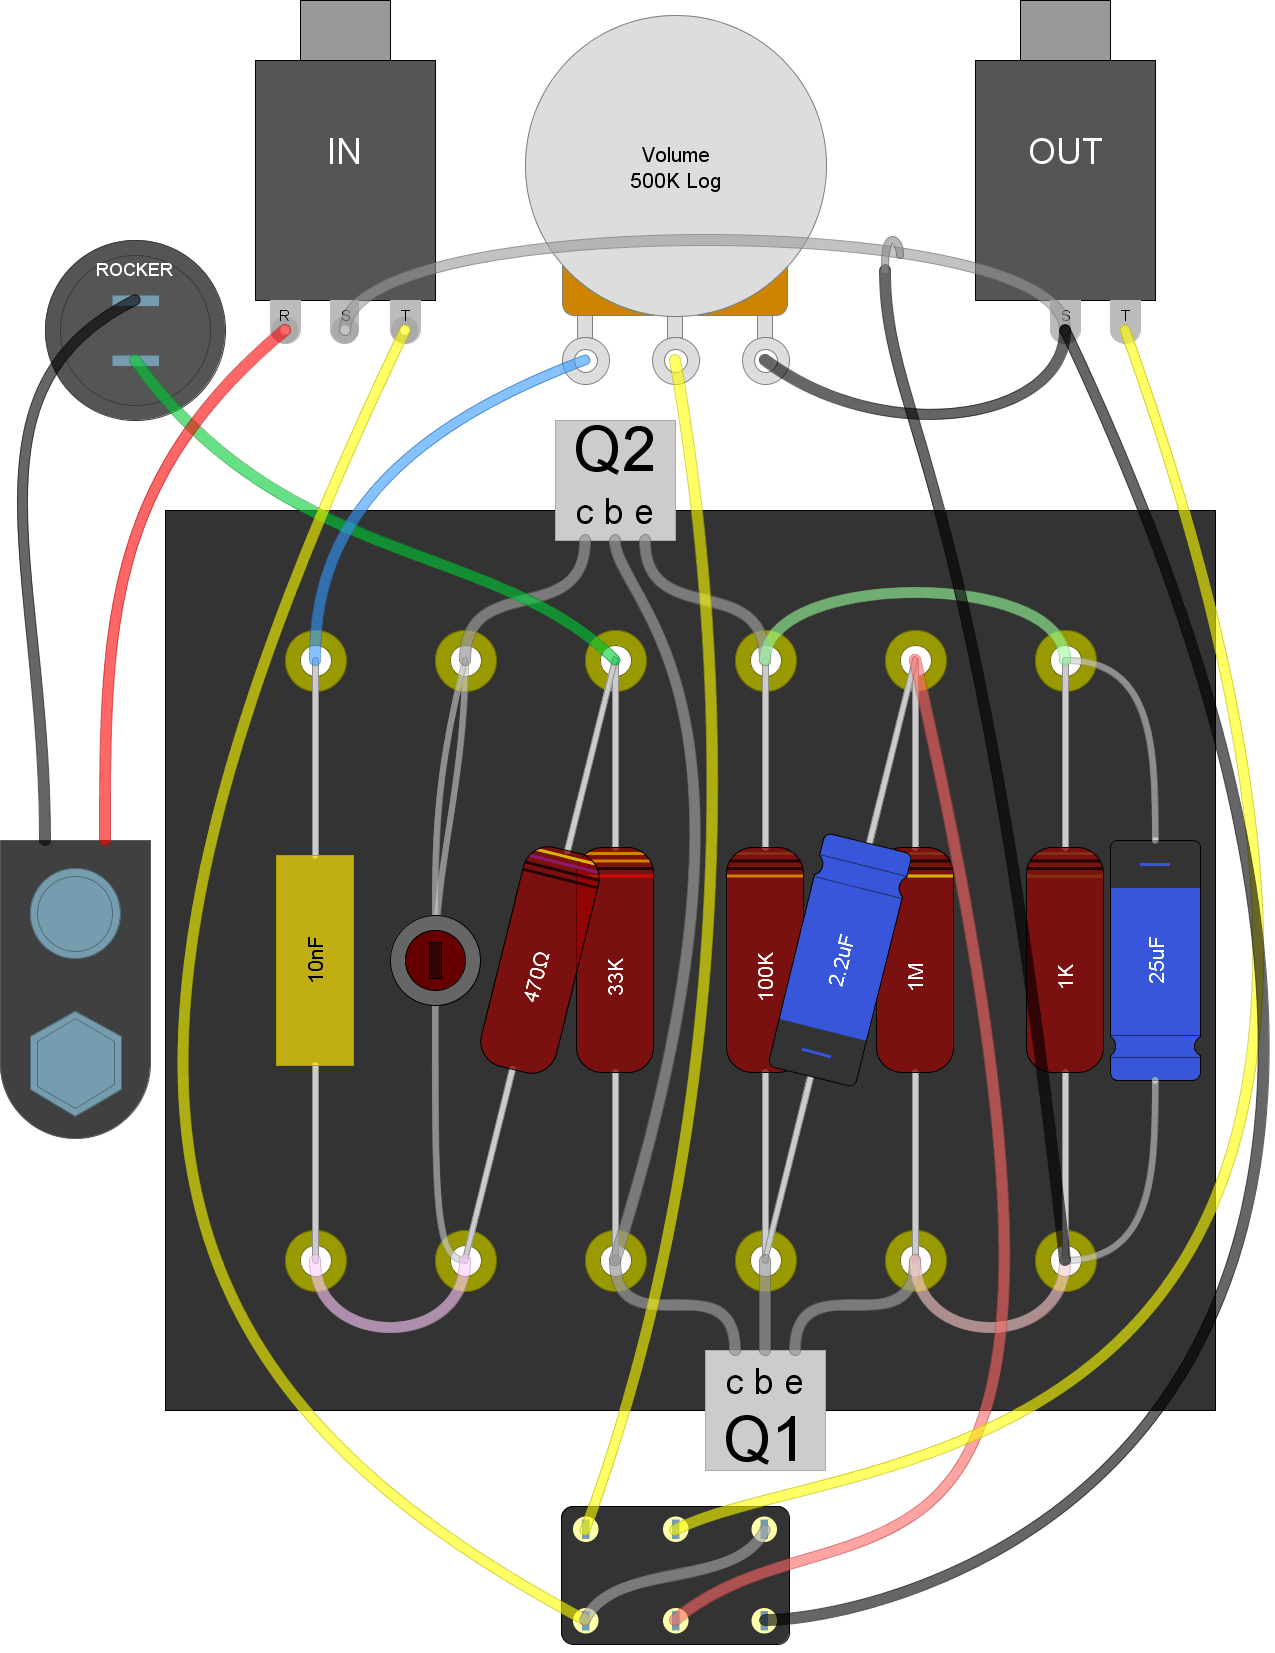 Figure 1: Eyelet board layout of the One Knob Fuzz Face